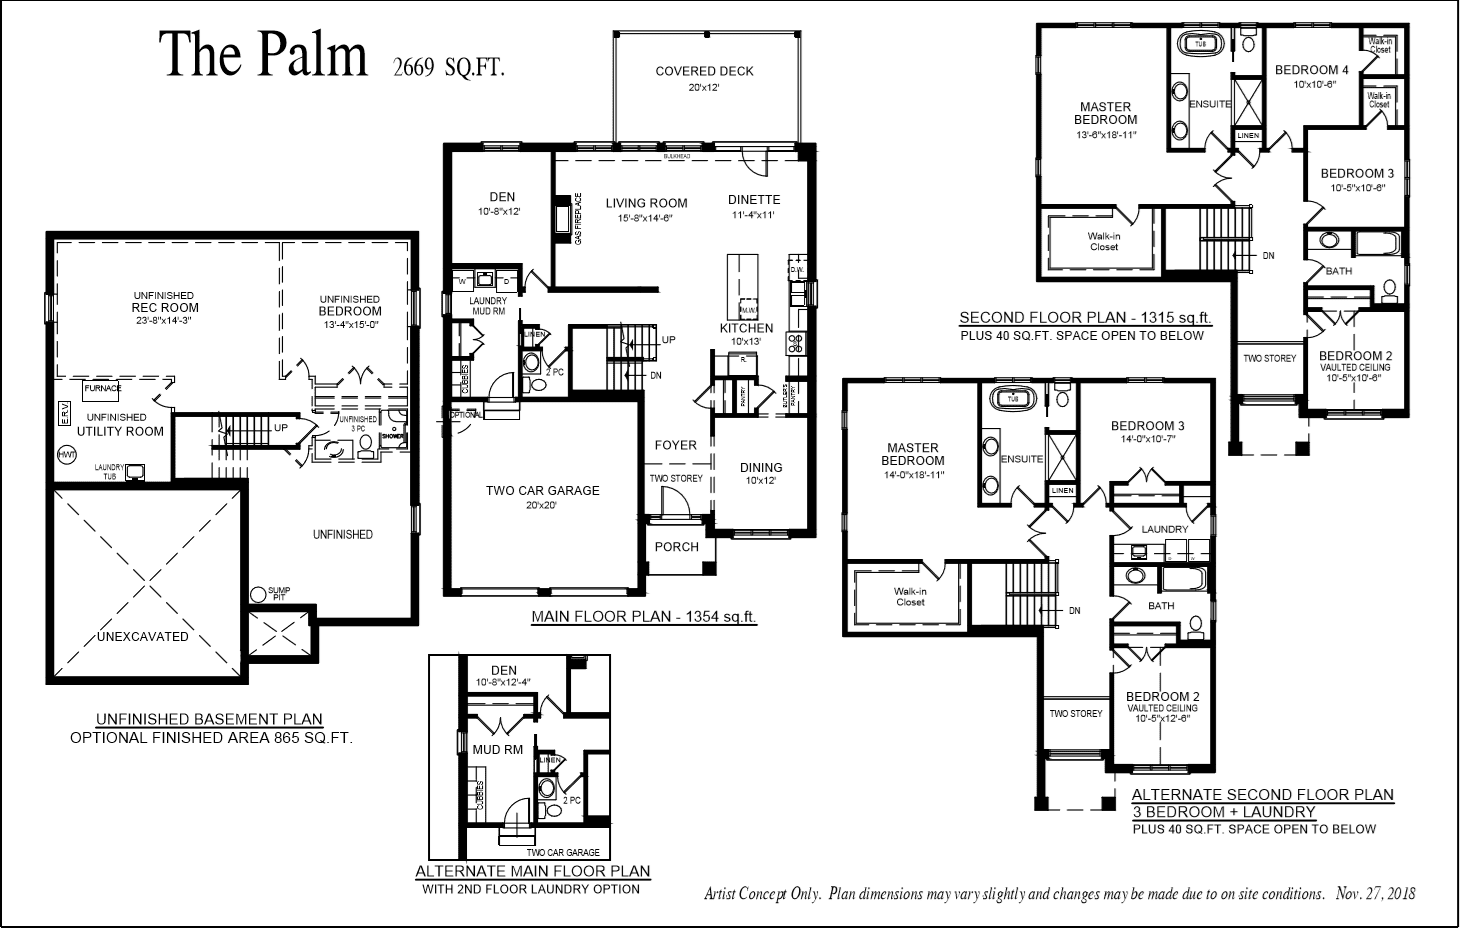 The Palm - Floor Plan - Meadowlily